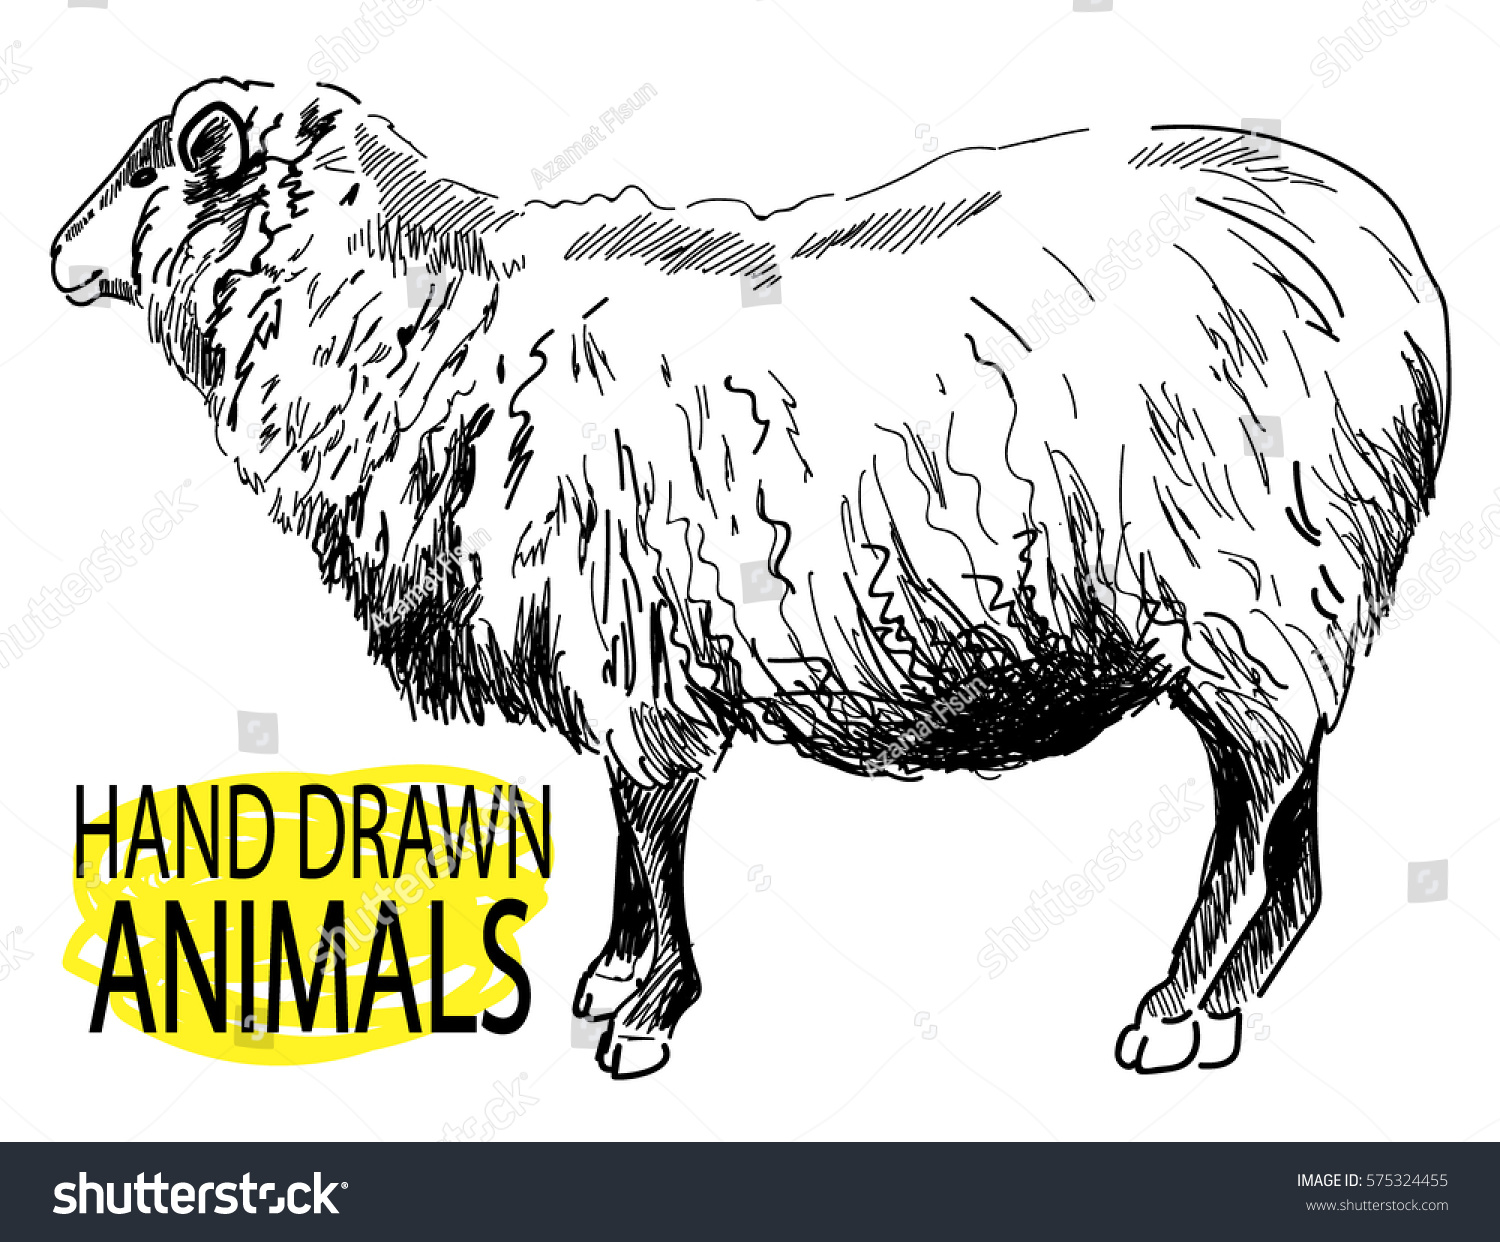 Sheep Drawing By Hand Vintage Style Stock Vector 575324455 - Shutterstock